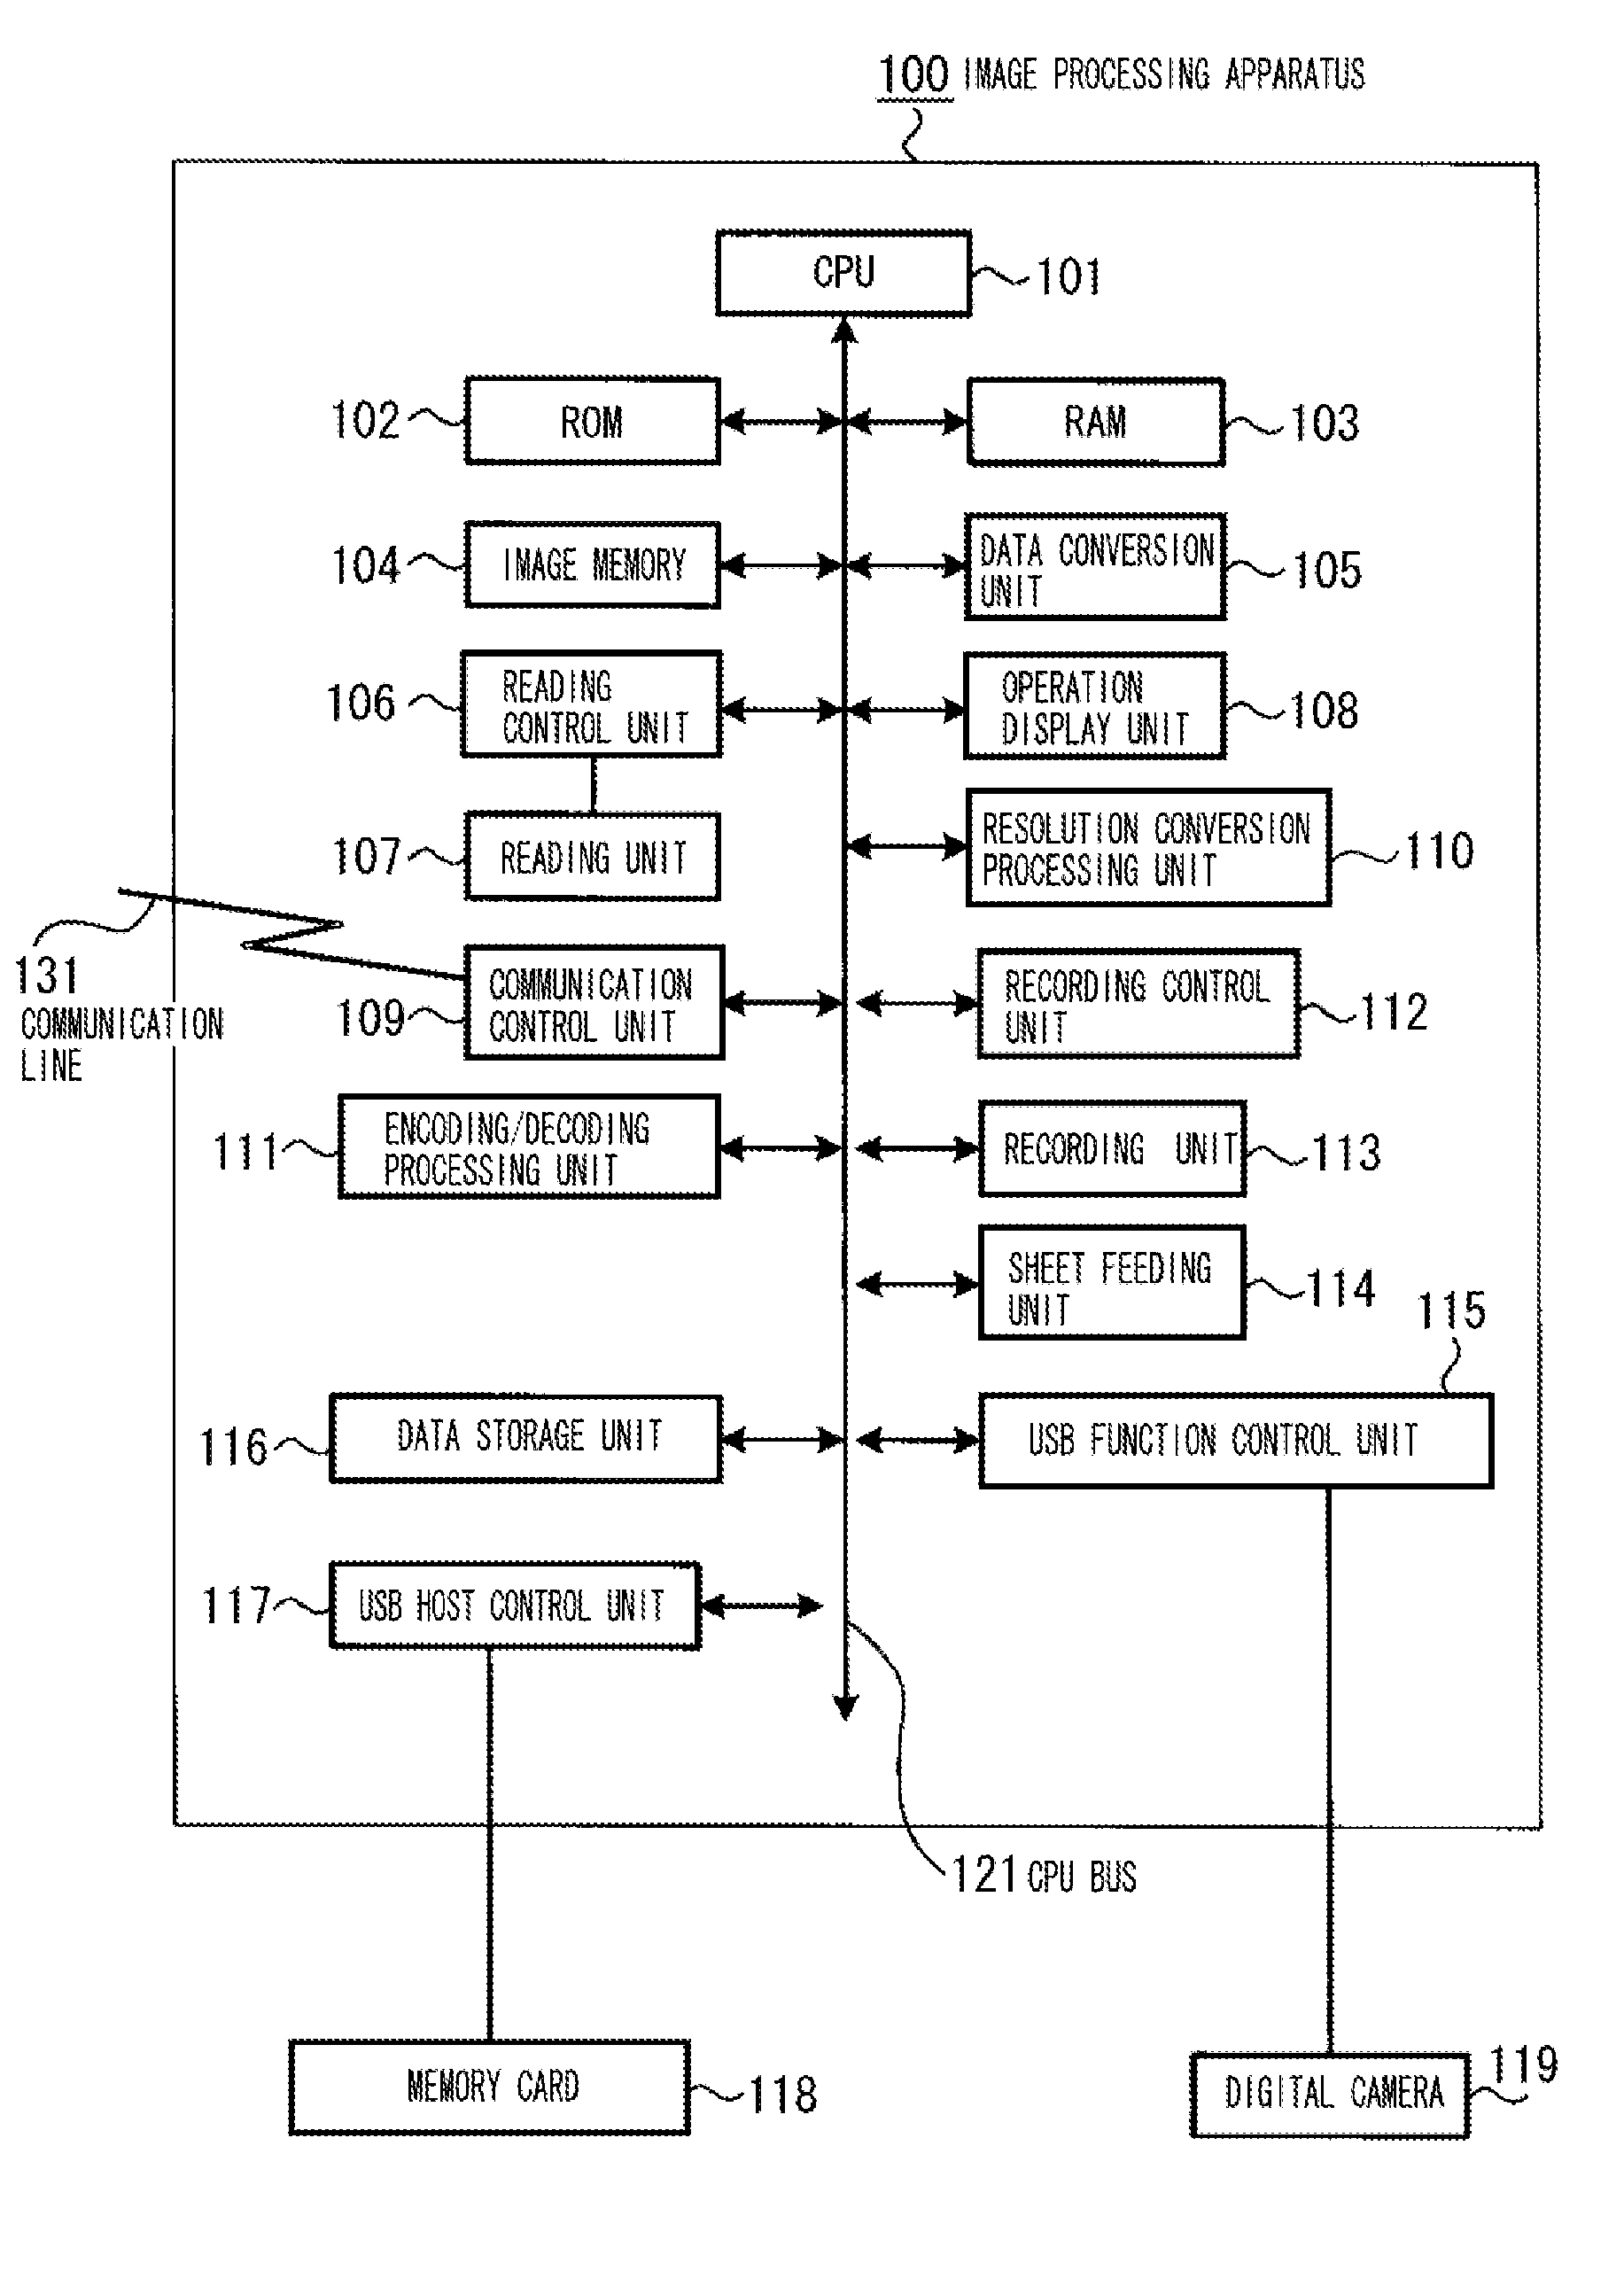 Image processing apparatus and method for controlling image processing apparatus